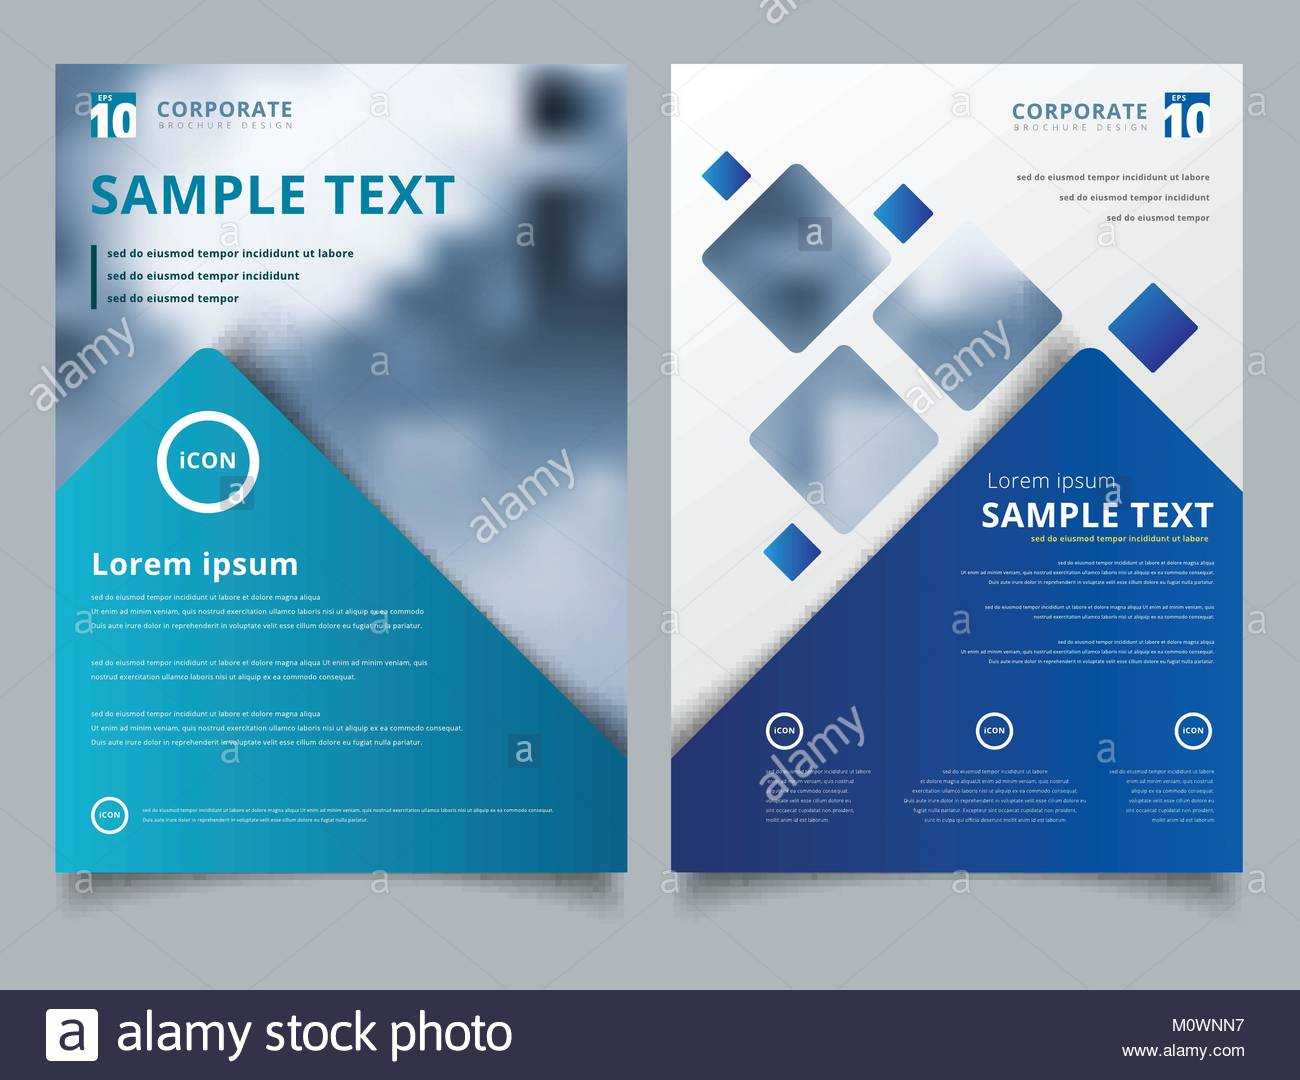 Free Poster Design Templates Illustrator With Scientific For Brochure Template Illustrator Free Download